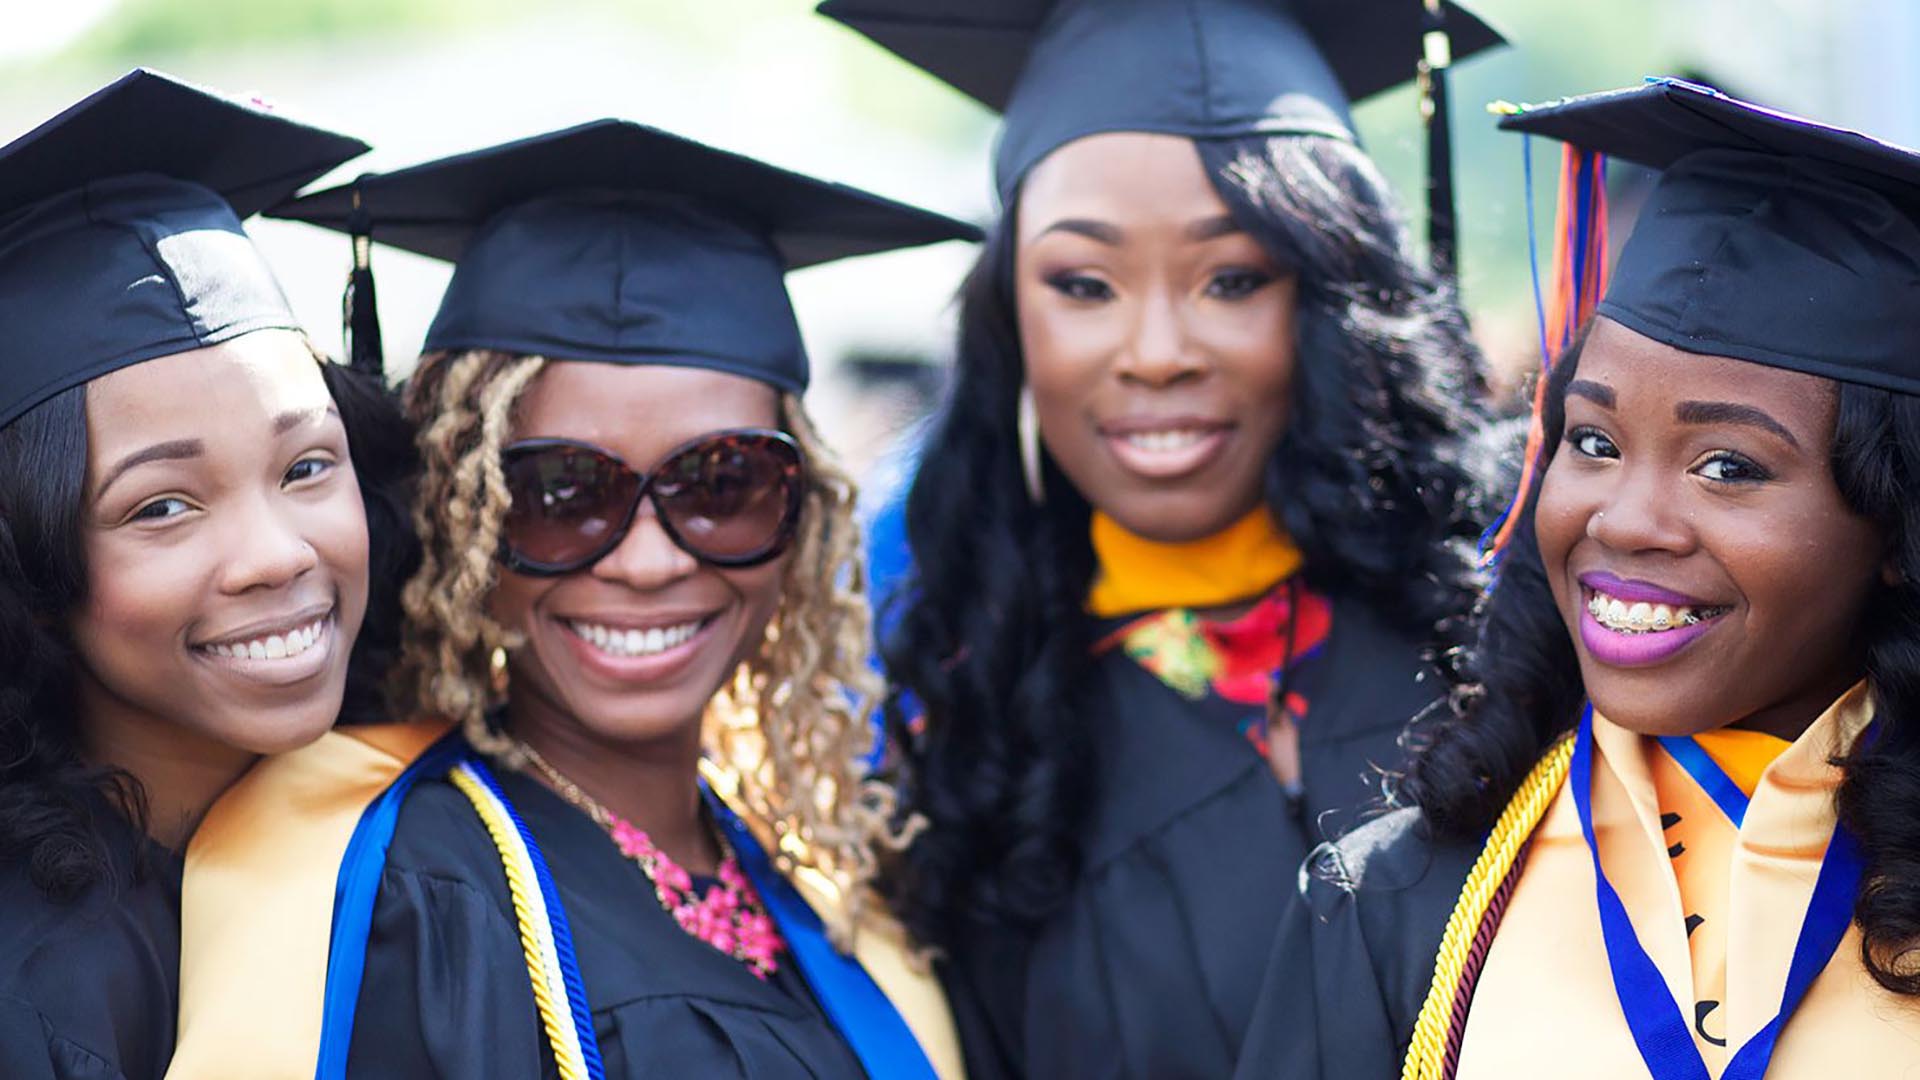 Four women smile and pose for the camera in graduation caps and gowns.